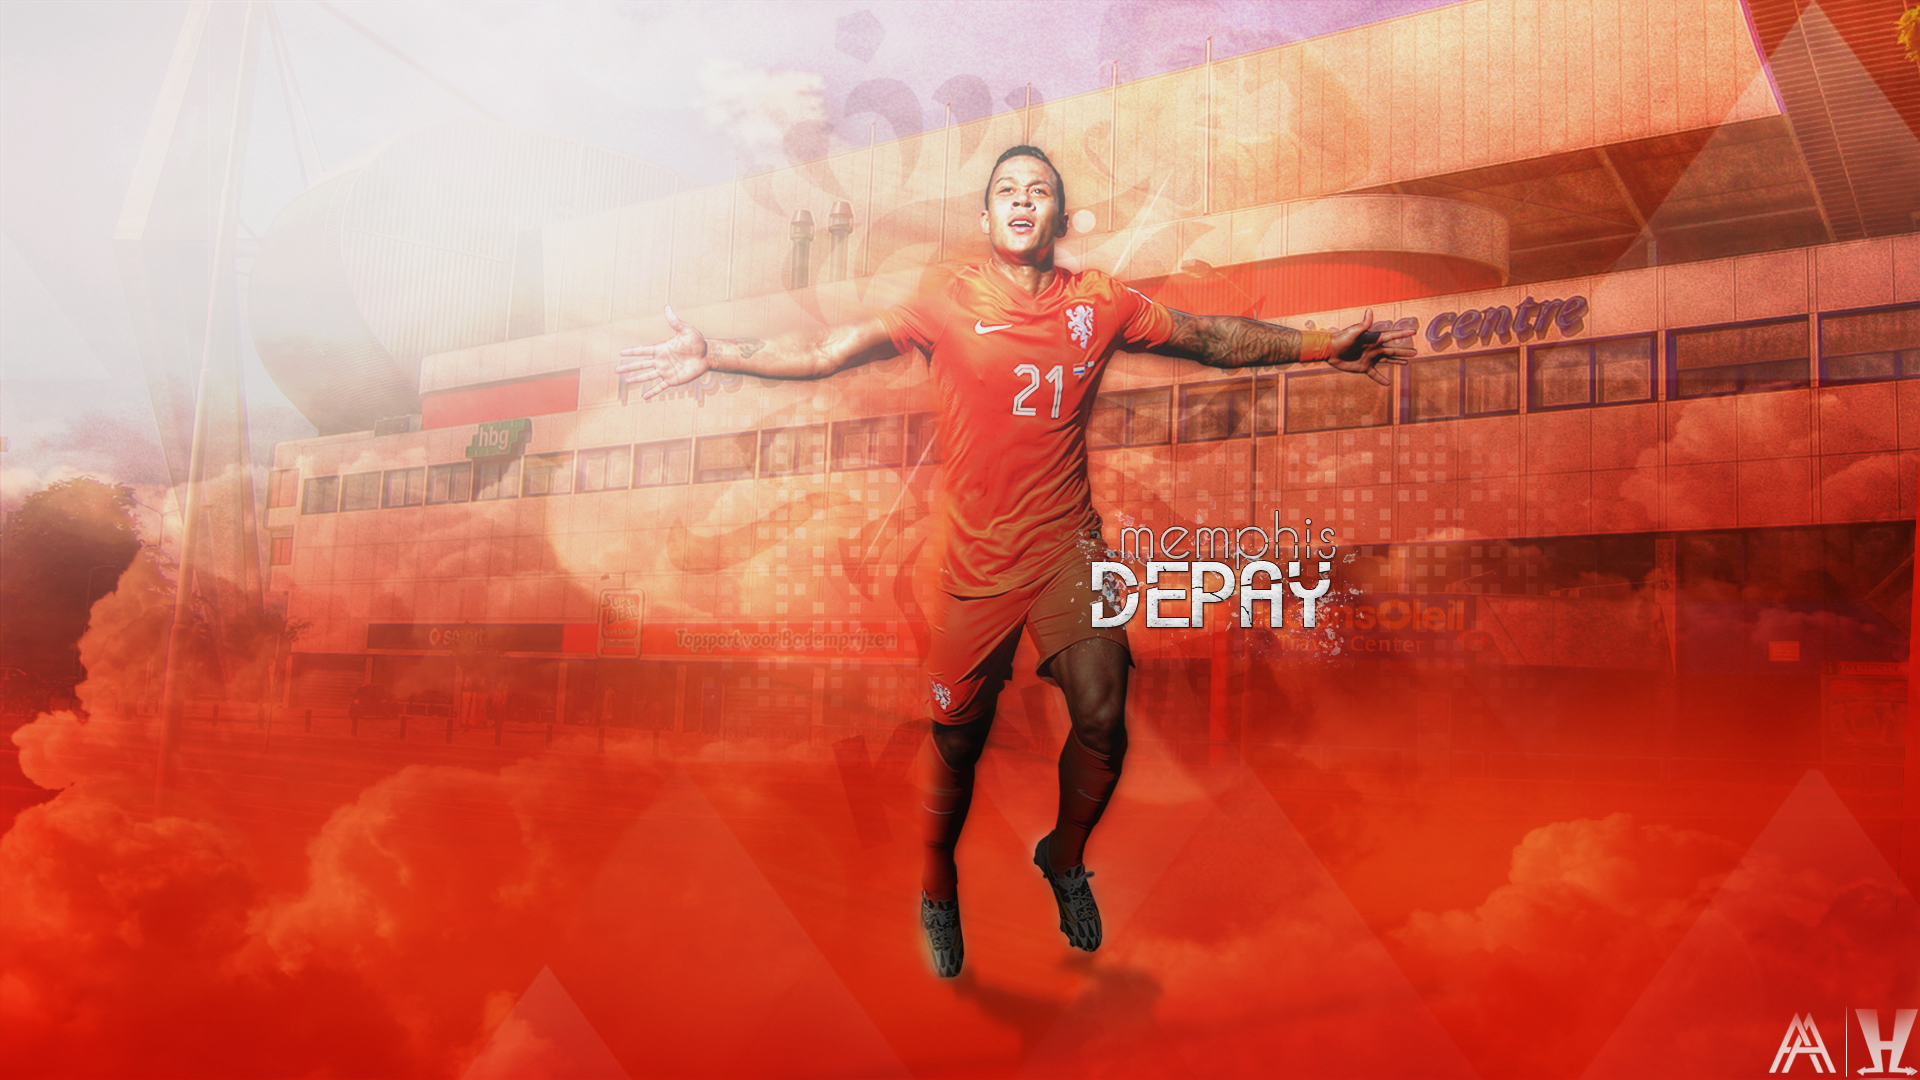 Memphis Depay Hd Wallpaper by HkM GraphicStudio on